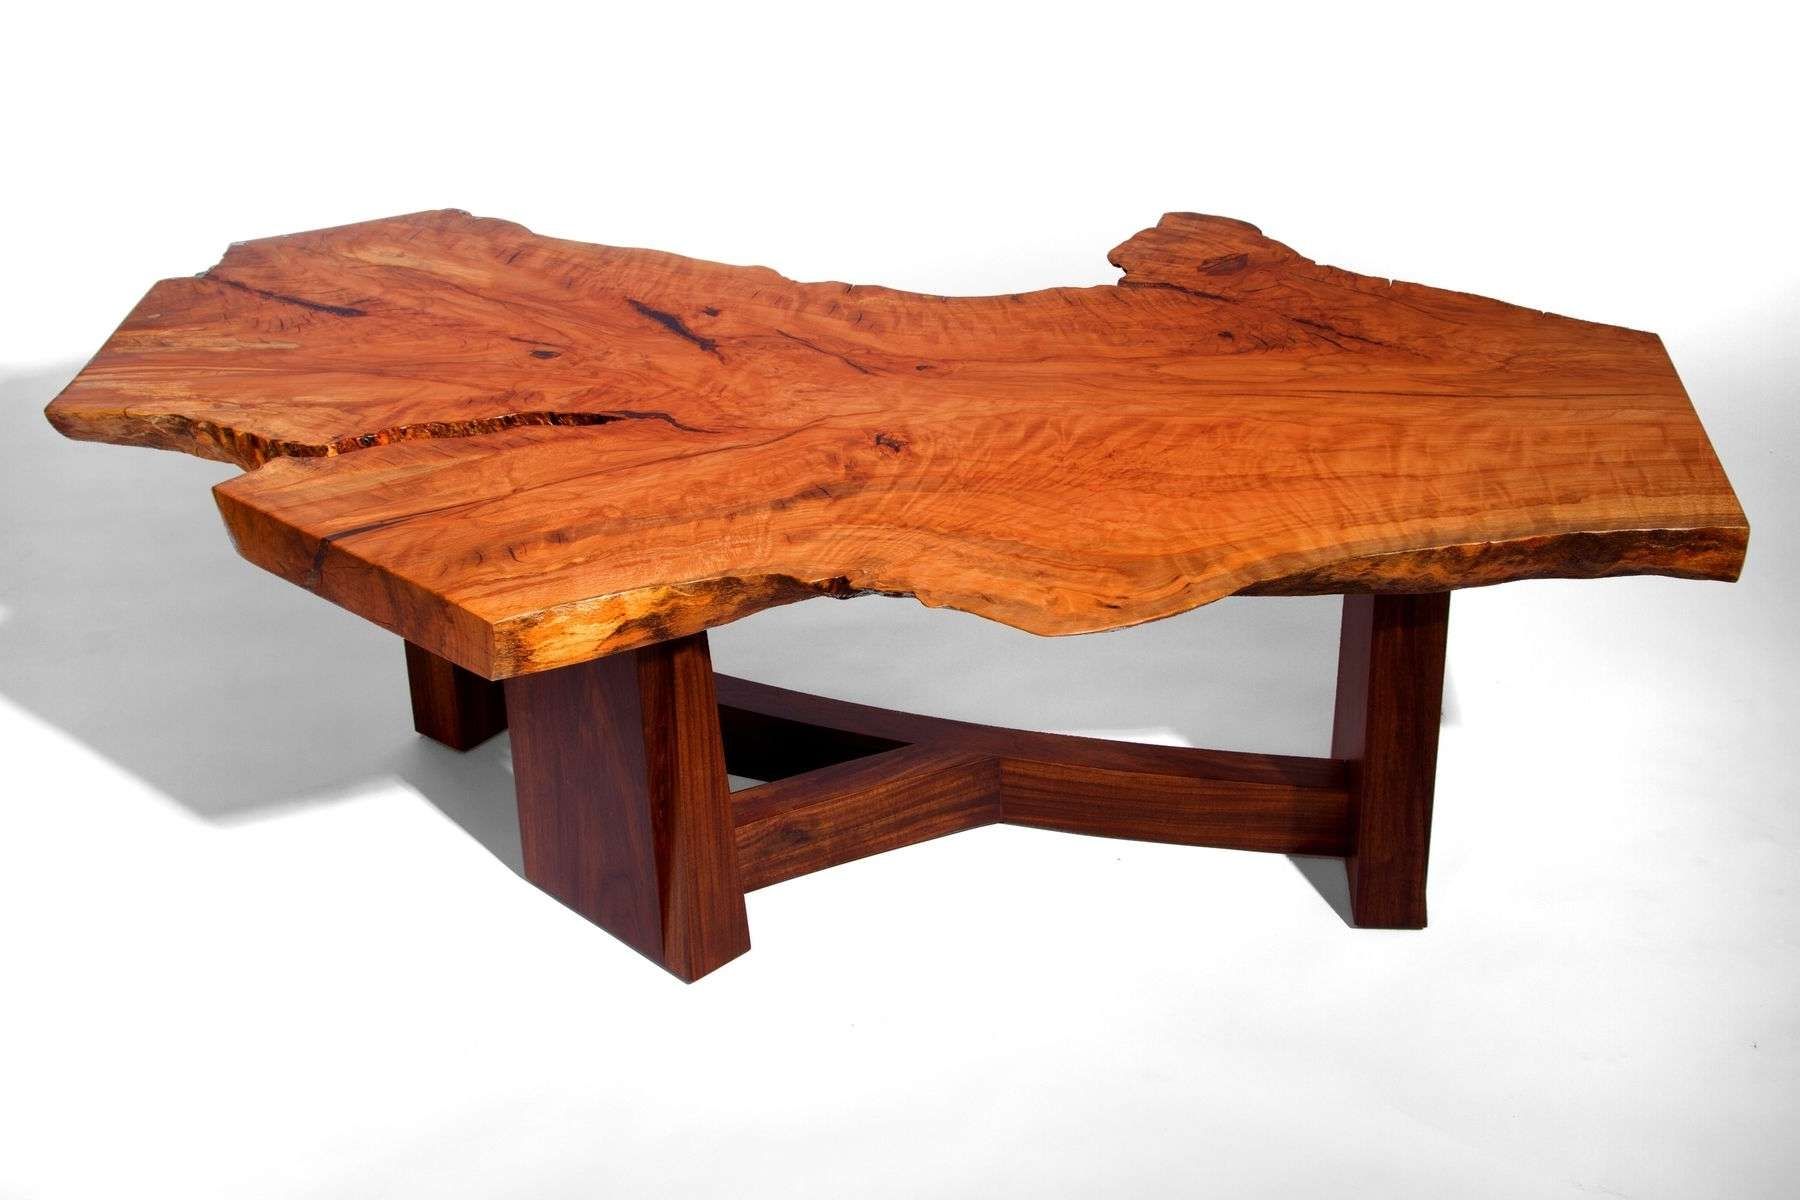 2018 Wooden Coffee Tables Regarding Custom Coffee Tables (View 10 of 20)